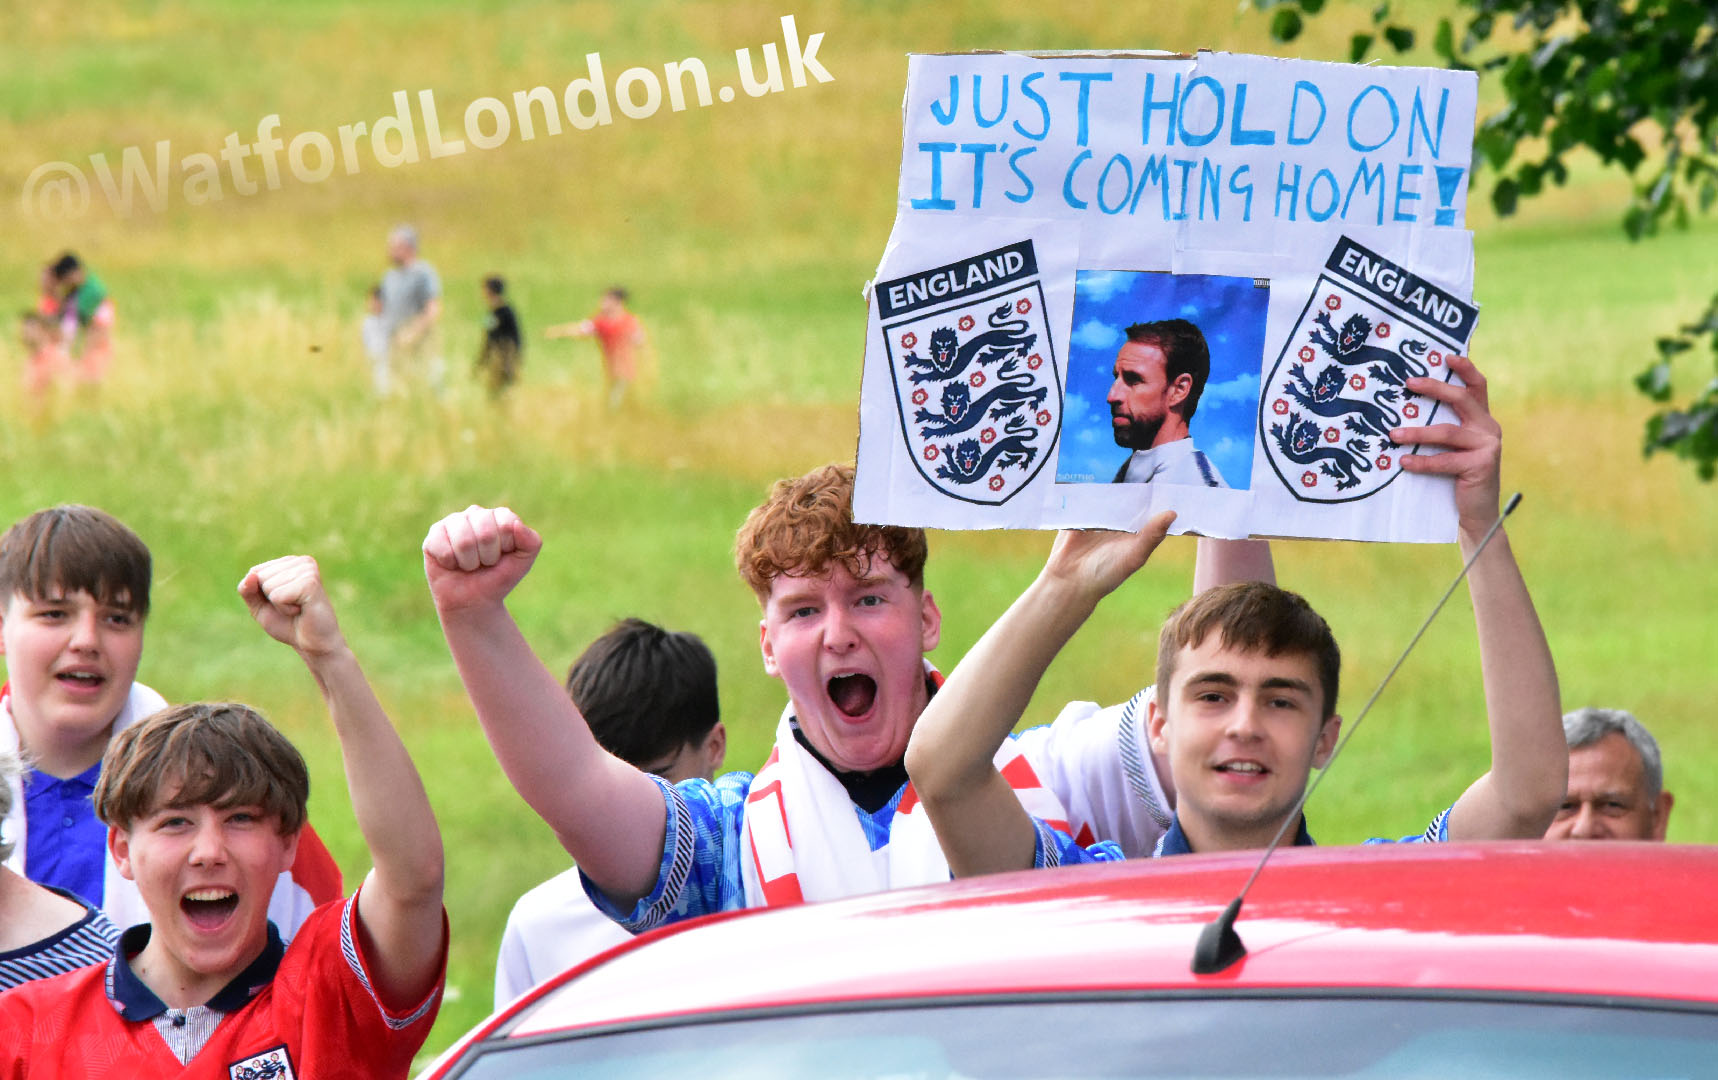 England Fans give big send-off at The Grove Hotel for Tonights Euro 2020 Final at Wembley